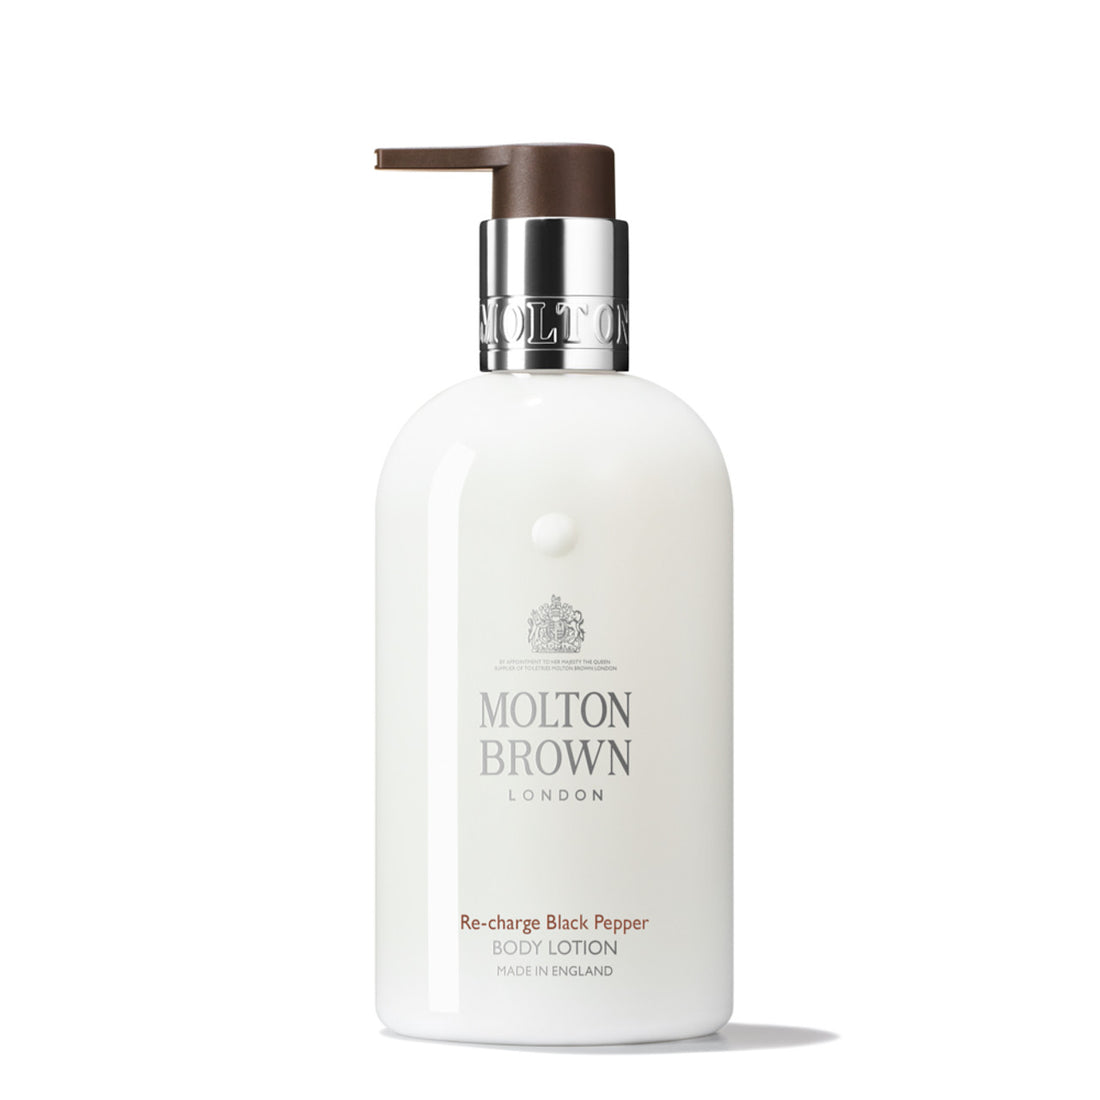 MOLTON BROWN - RE-CHARGE BLACK PEPPER BODY LOTION 300 ML